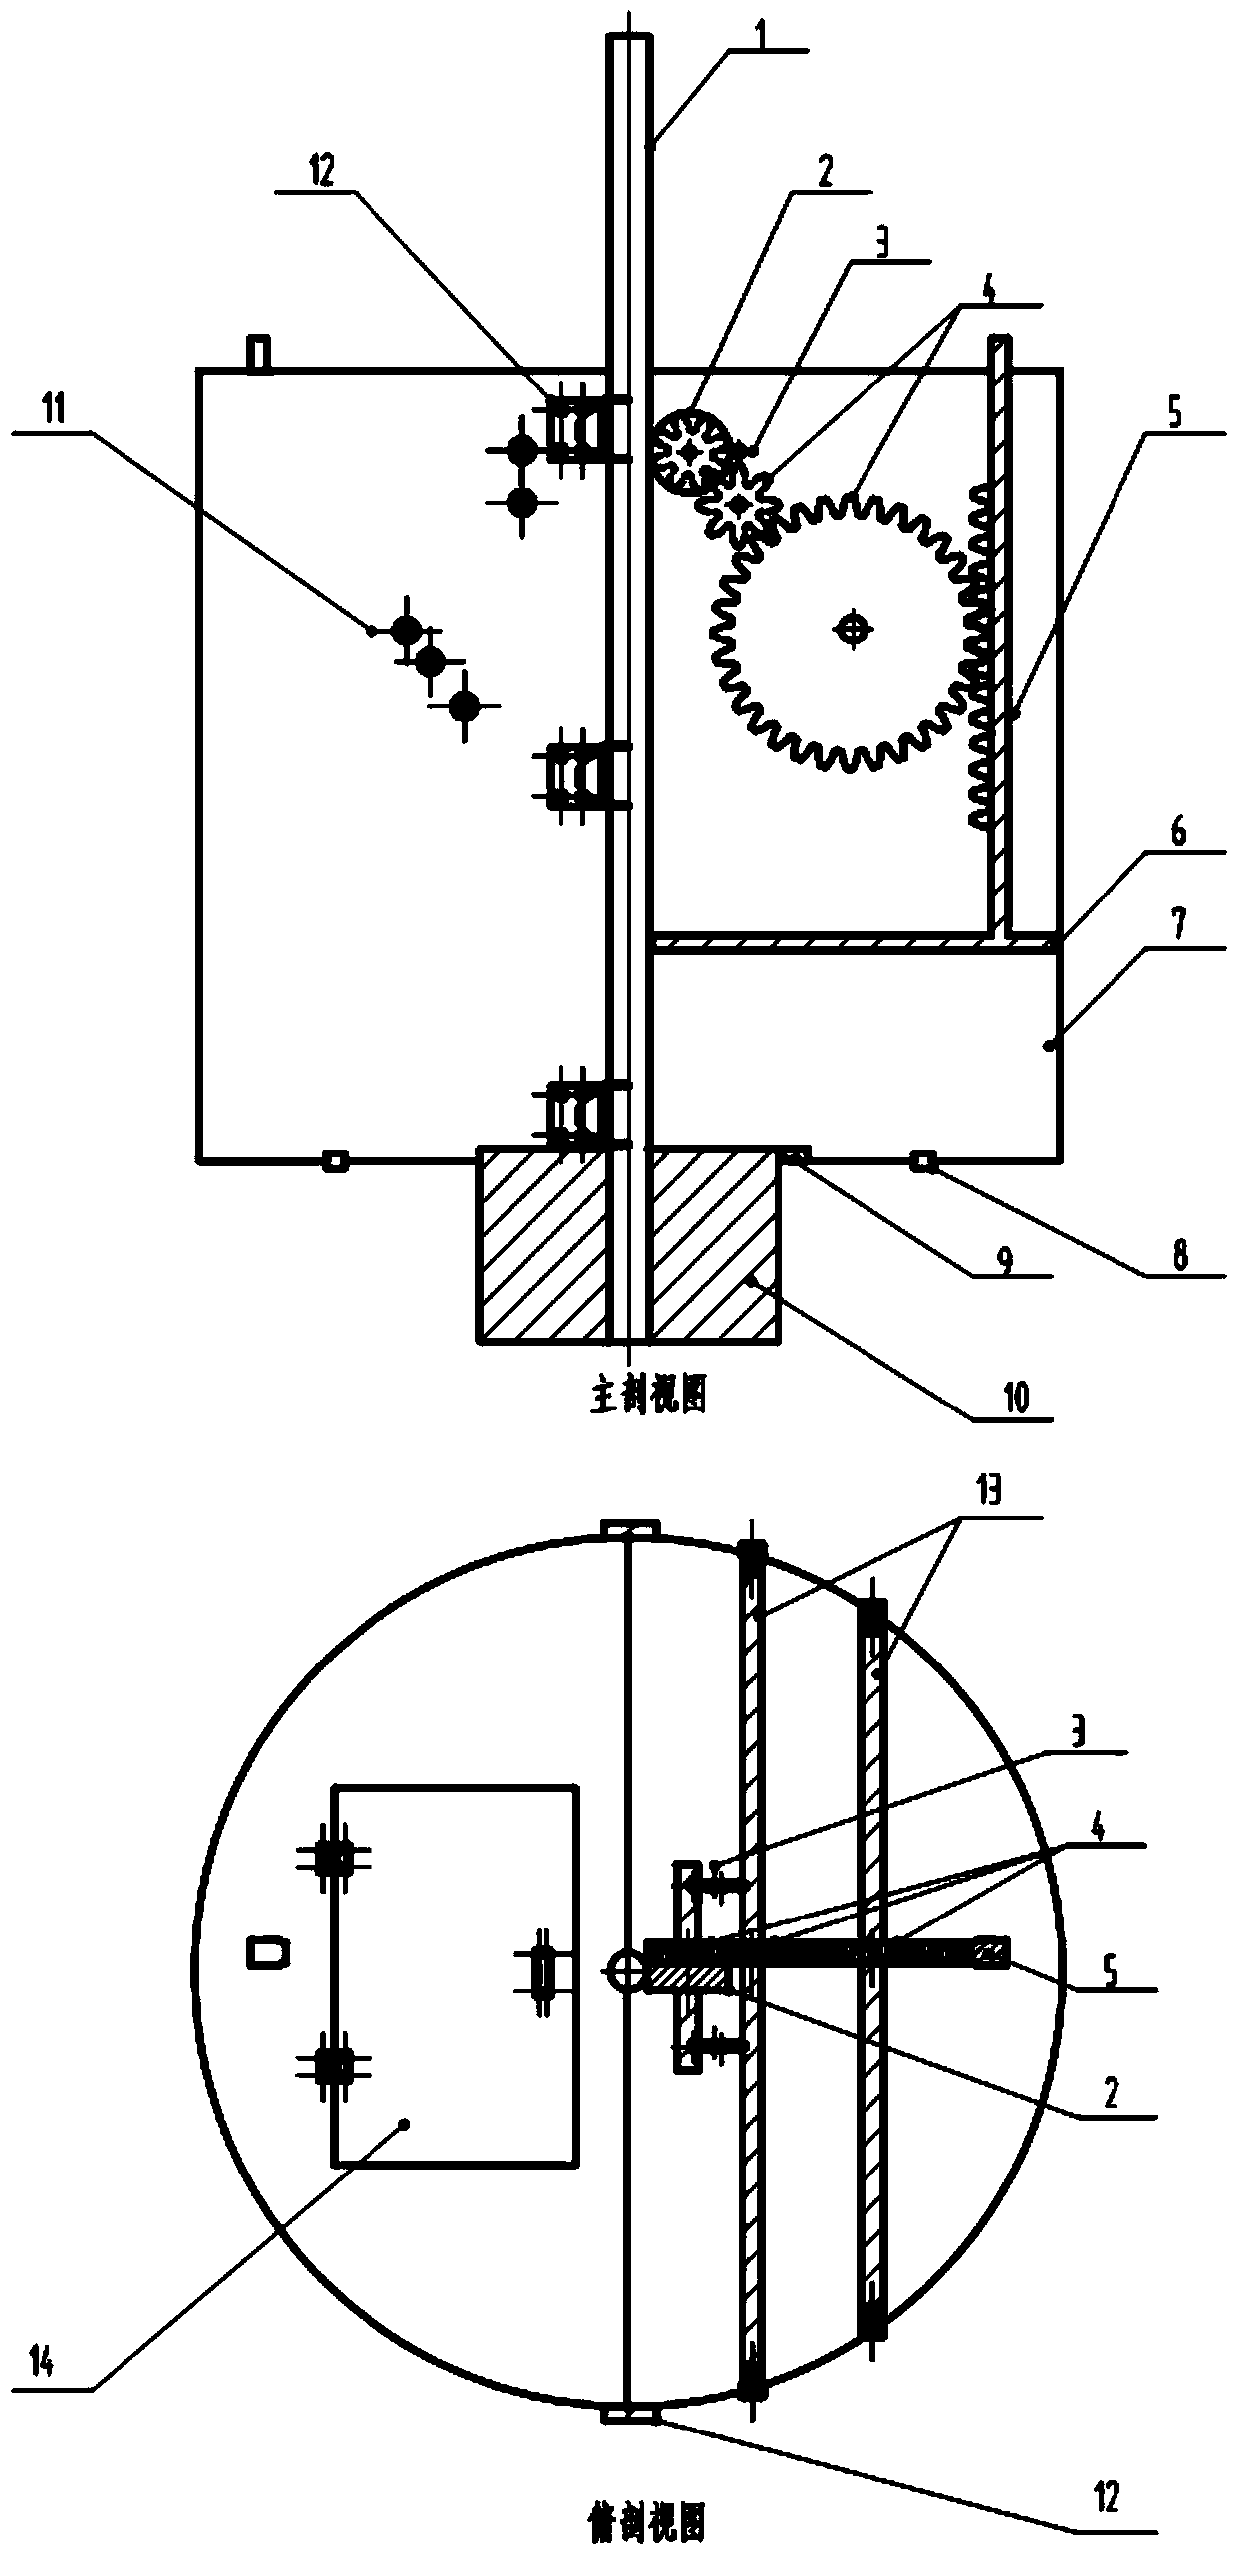 Airtight leak-prevention method for sealing gaps between wellhead packing box and polished rod